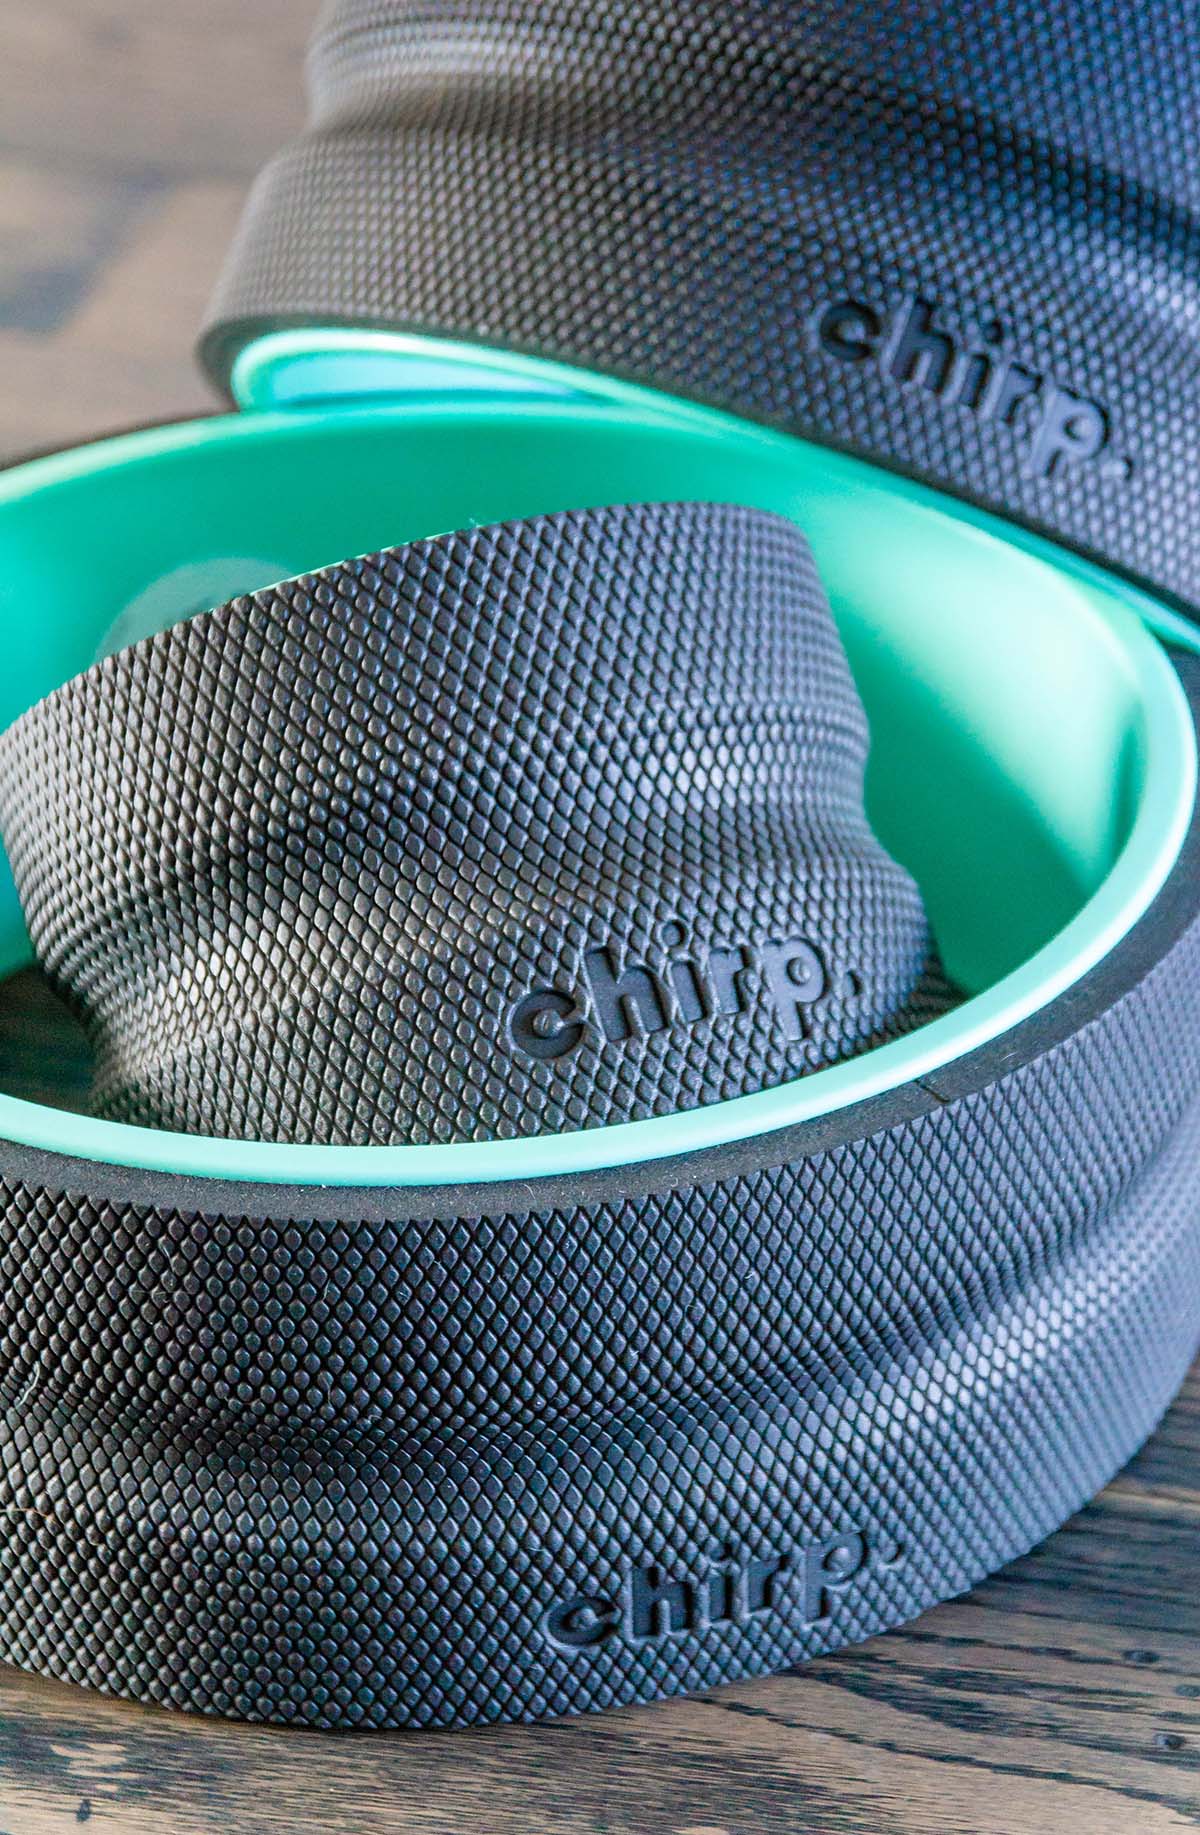 22 Perfect Fitness Gifts For Healthy Living In The New Year